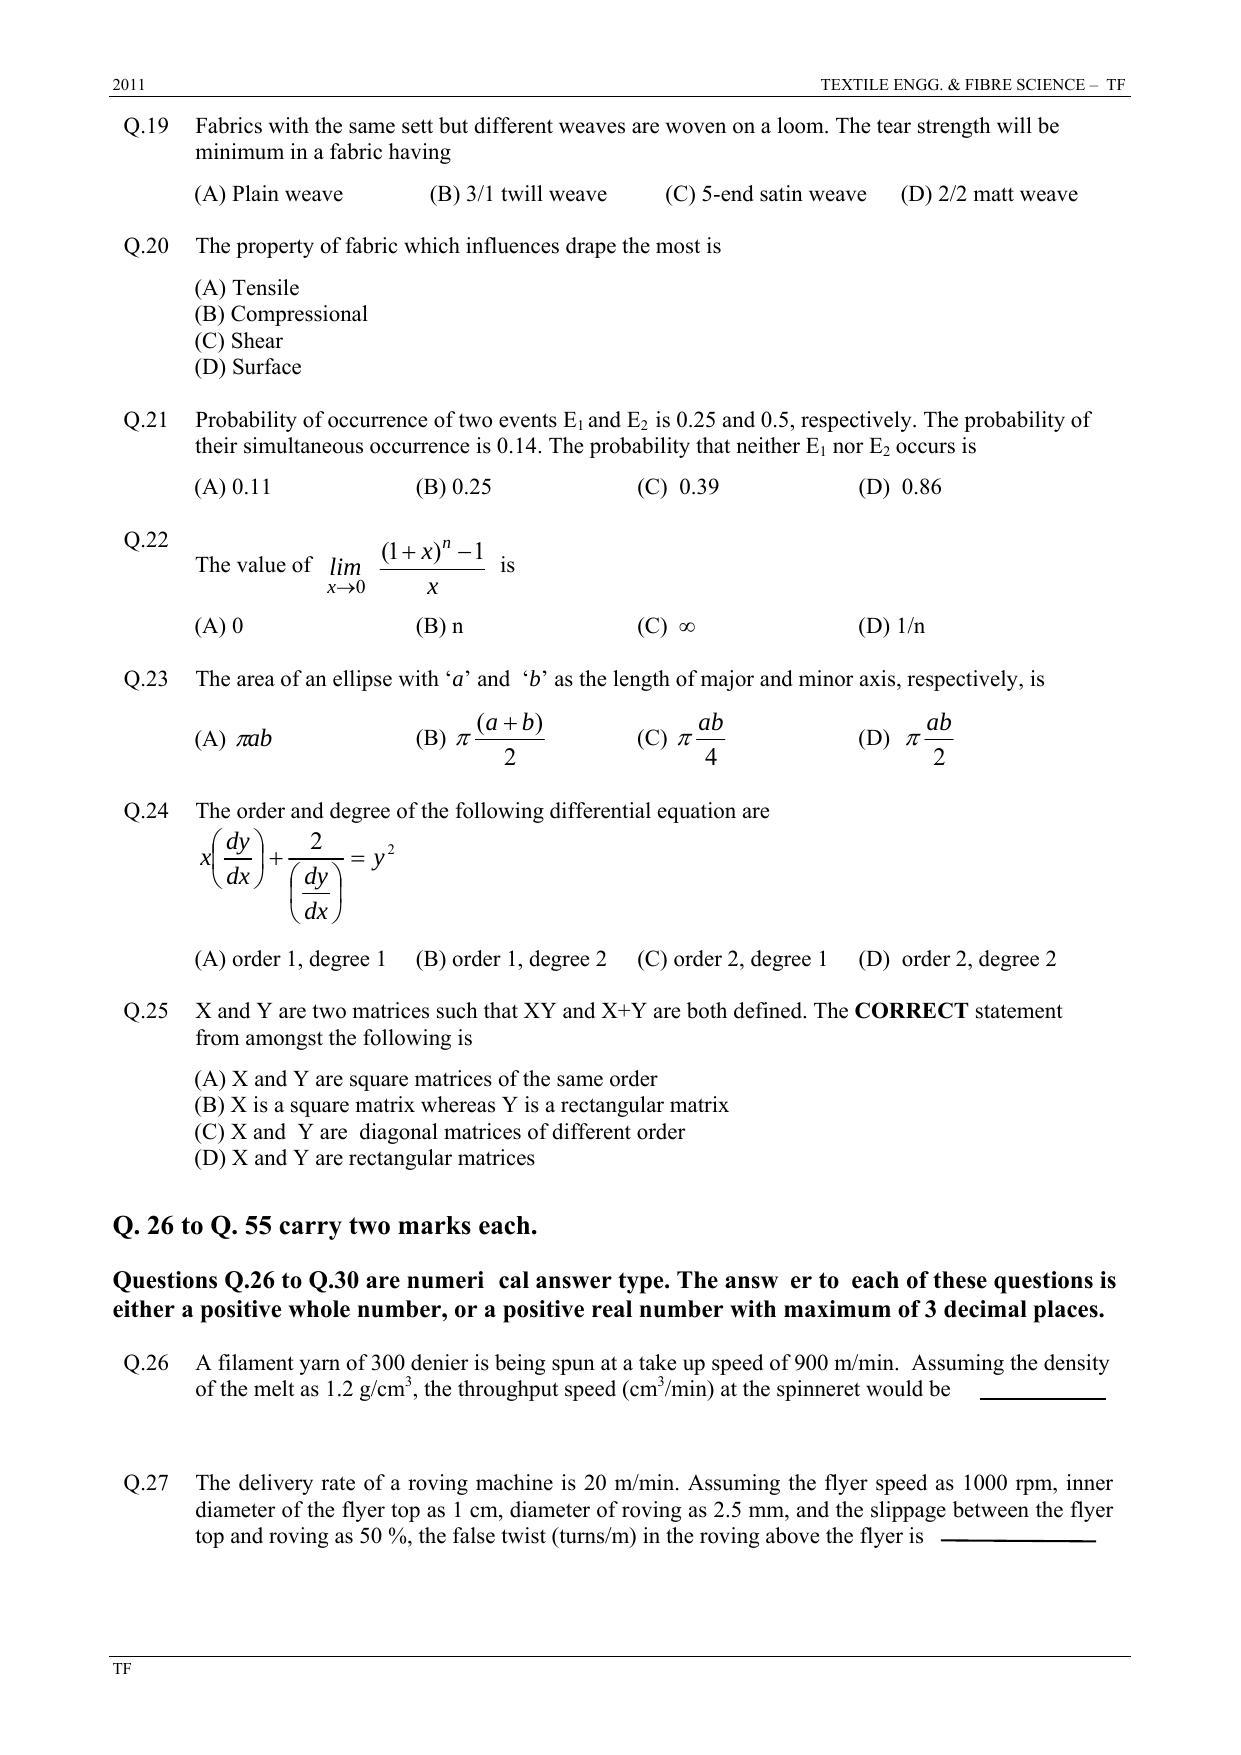 GATE 2011 Textile Engineering and Fibre Science (TF) Question Paper with Answer Key - Page 4